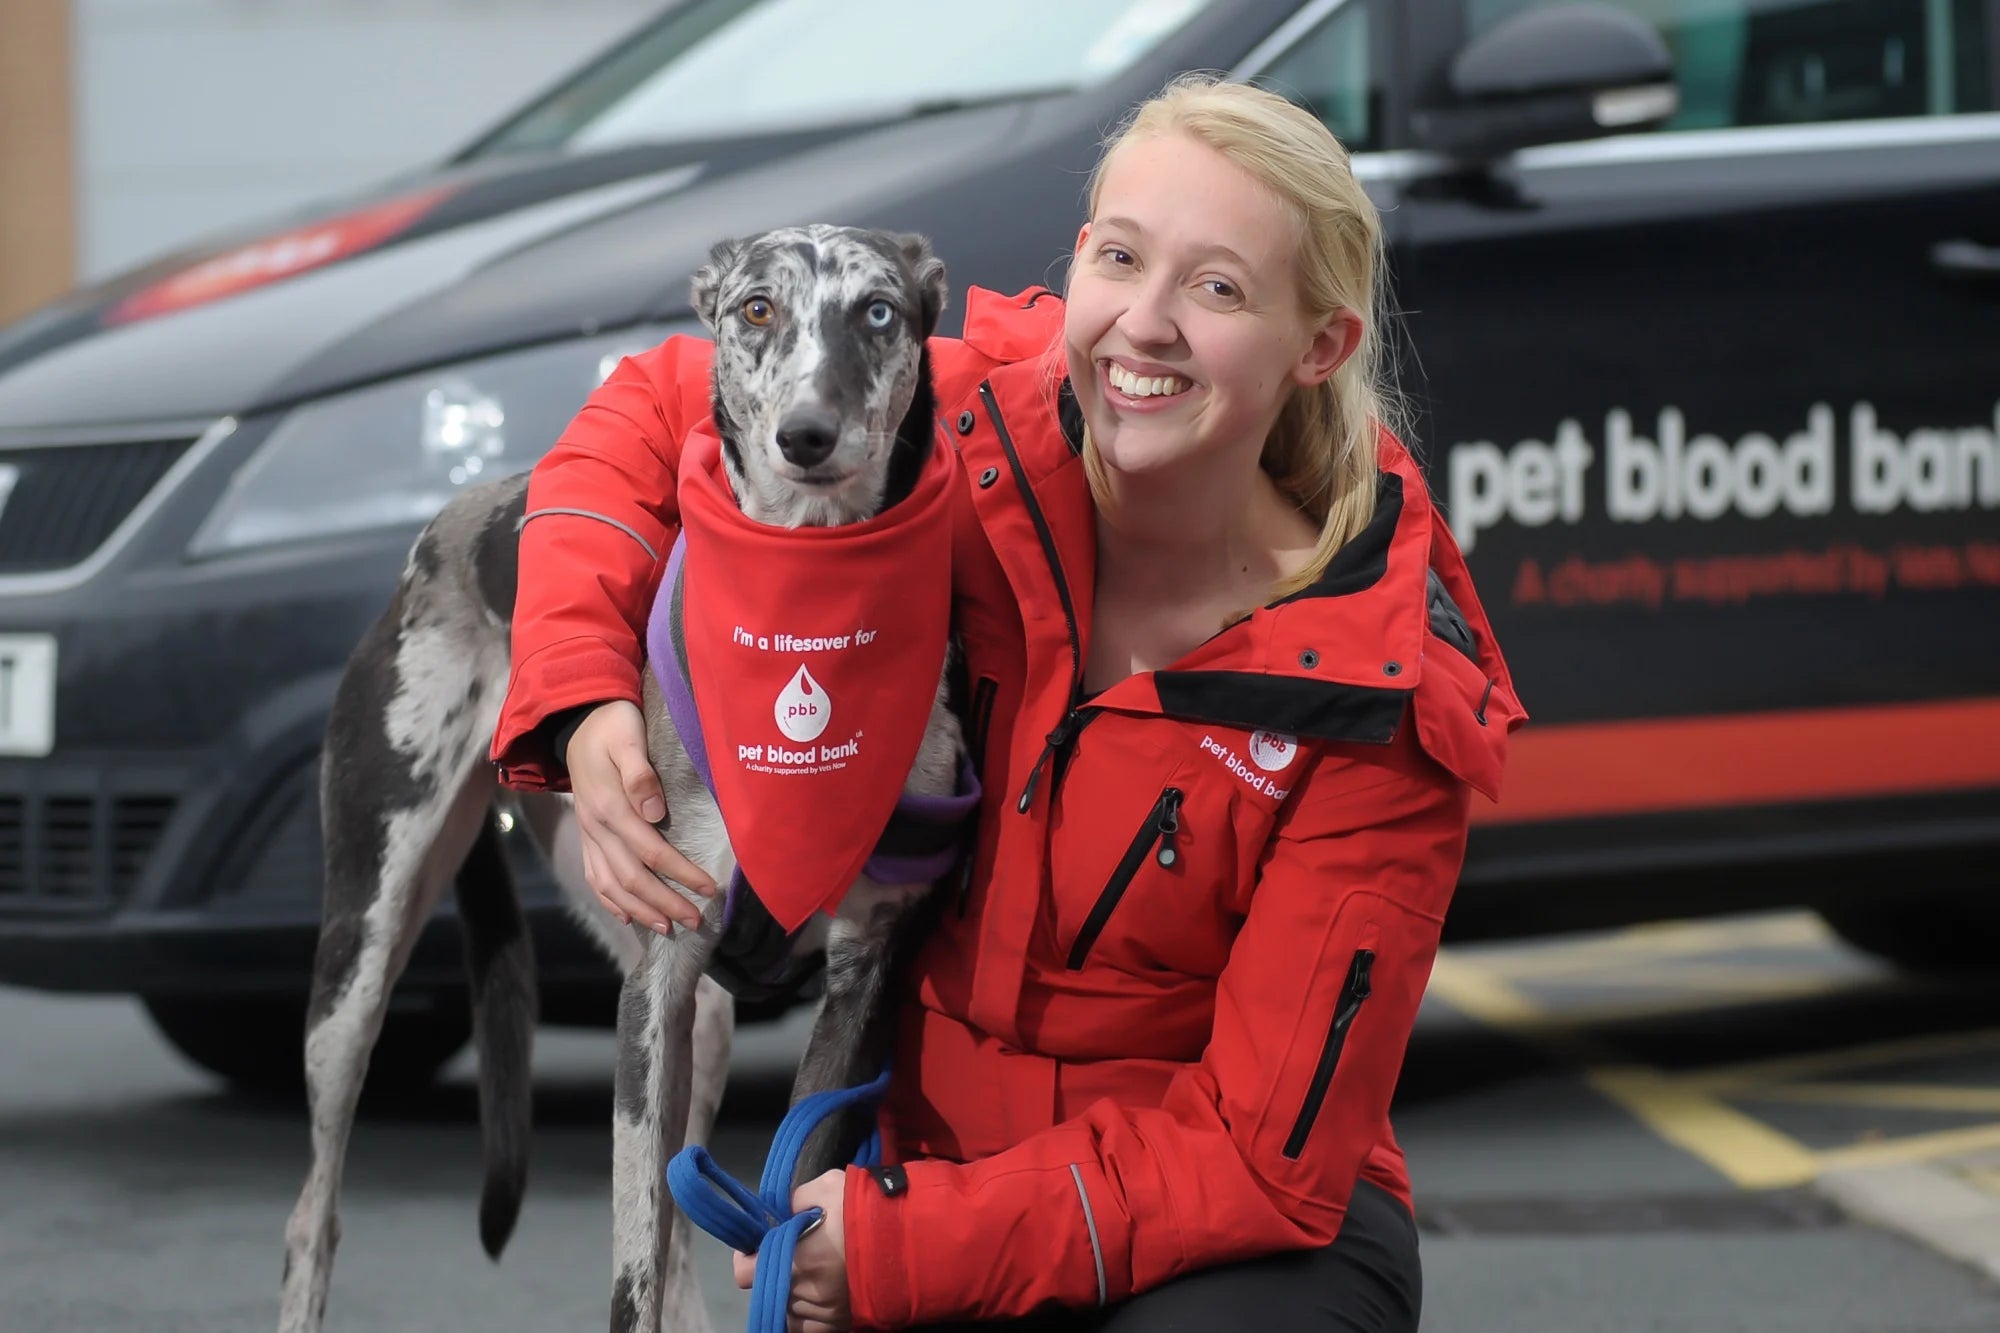 The Pet Blood Bank – Can your dog donate?